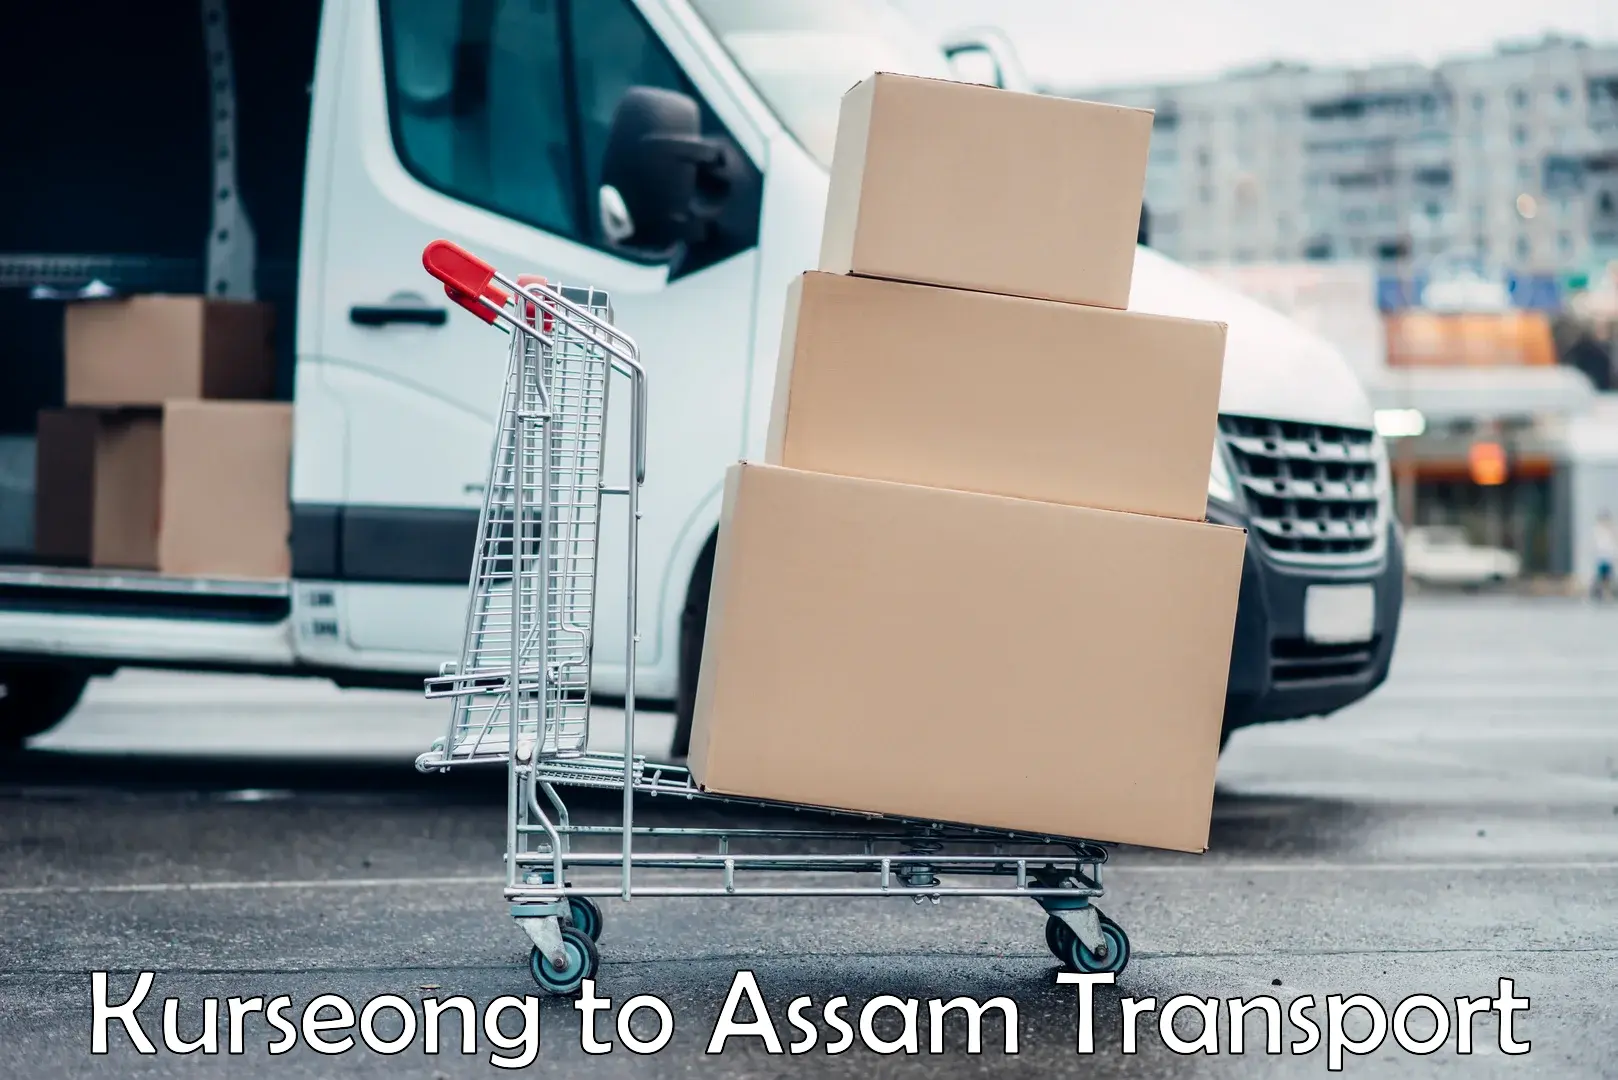 Transport bike from one state to another Kurseong to Assam